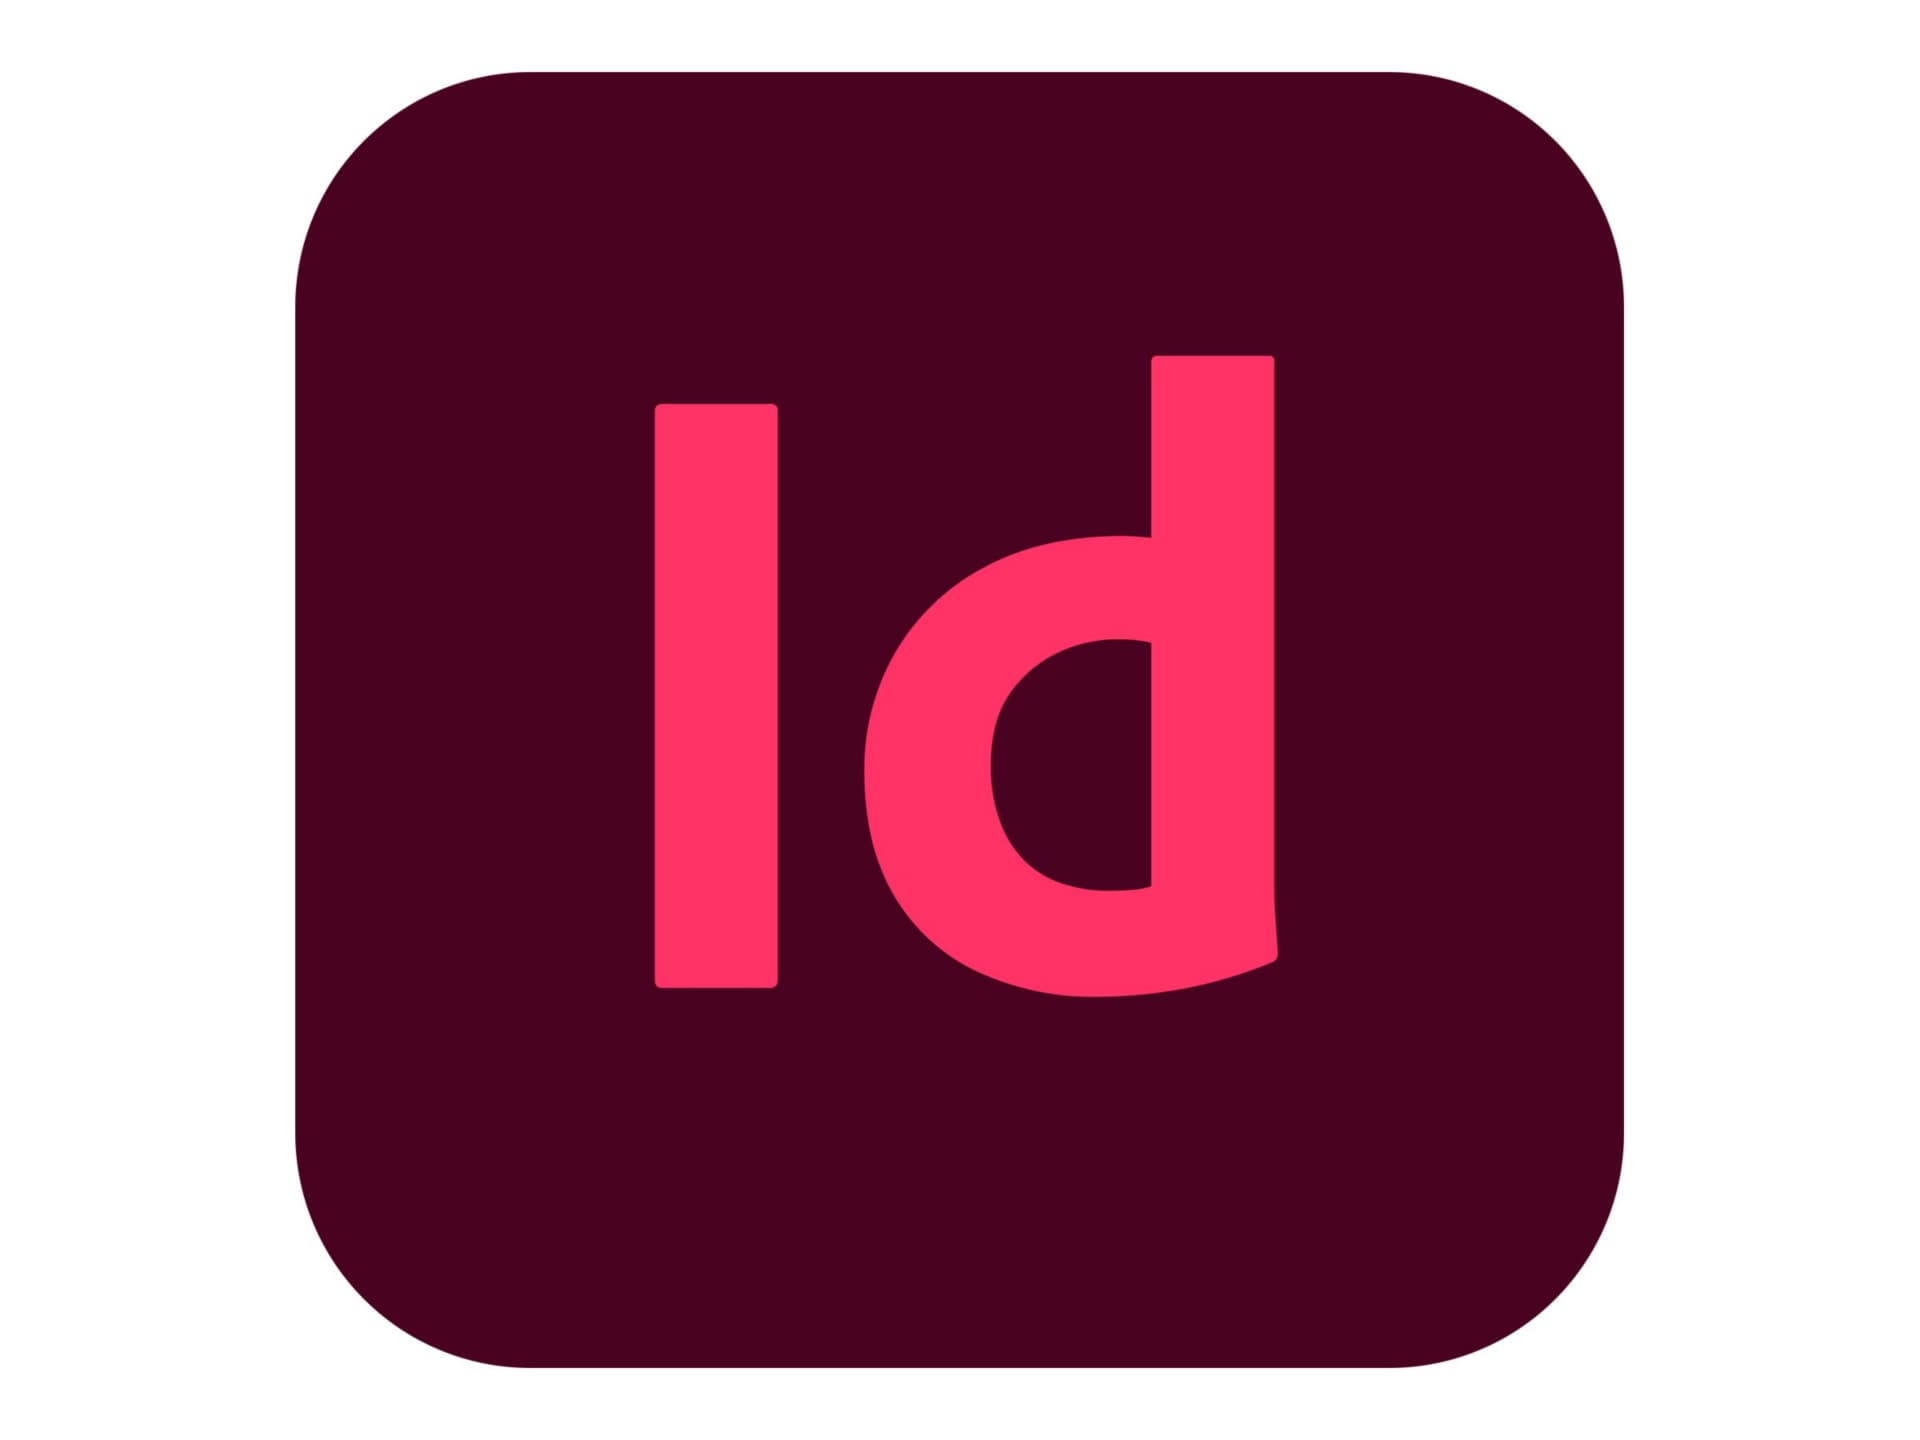 Adobe InDesign CC for teams - Subscription New (5 months) - 1 named user